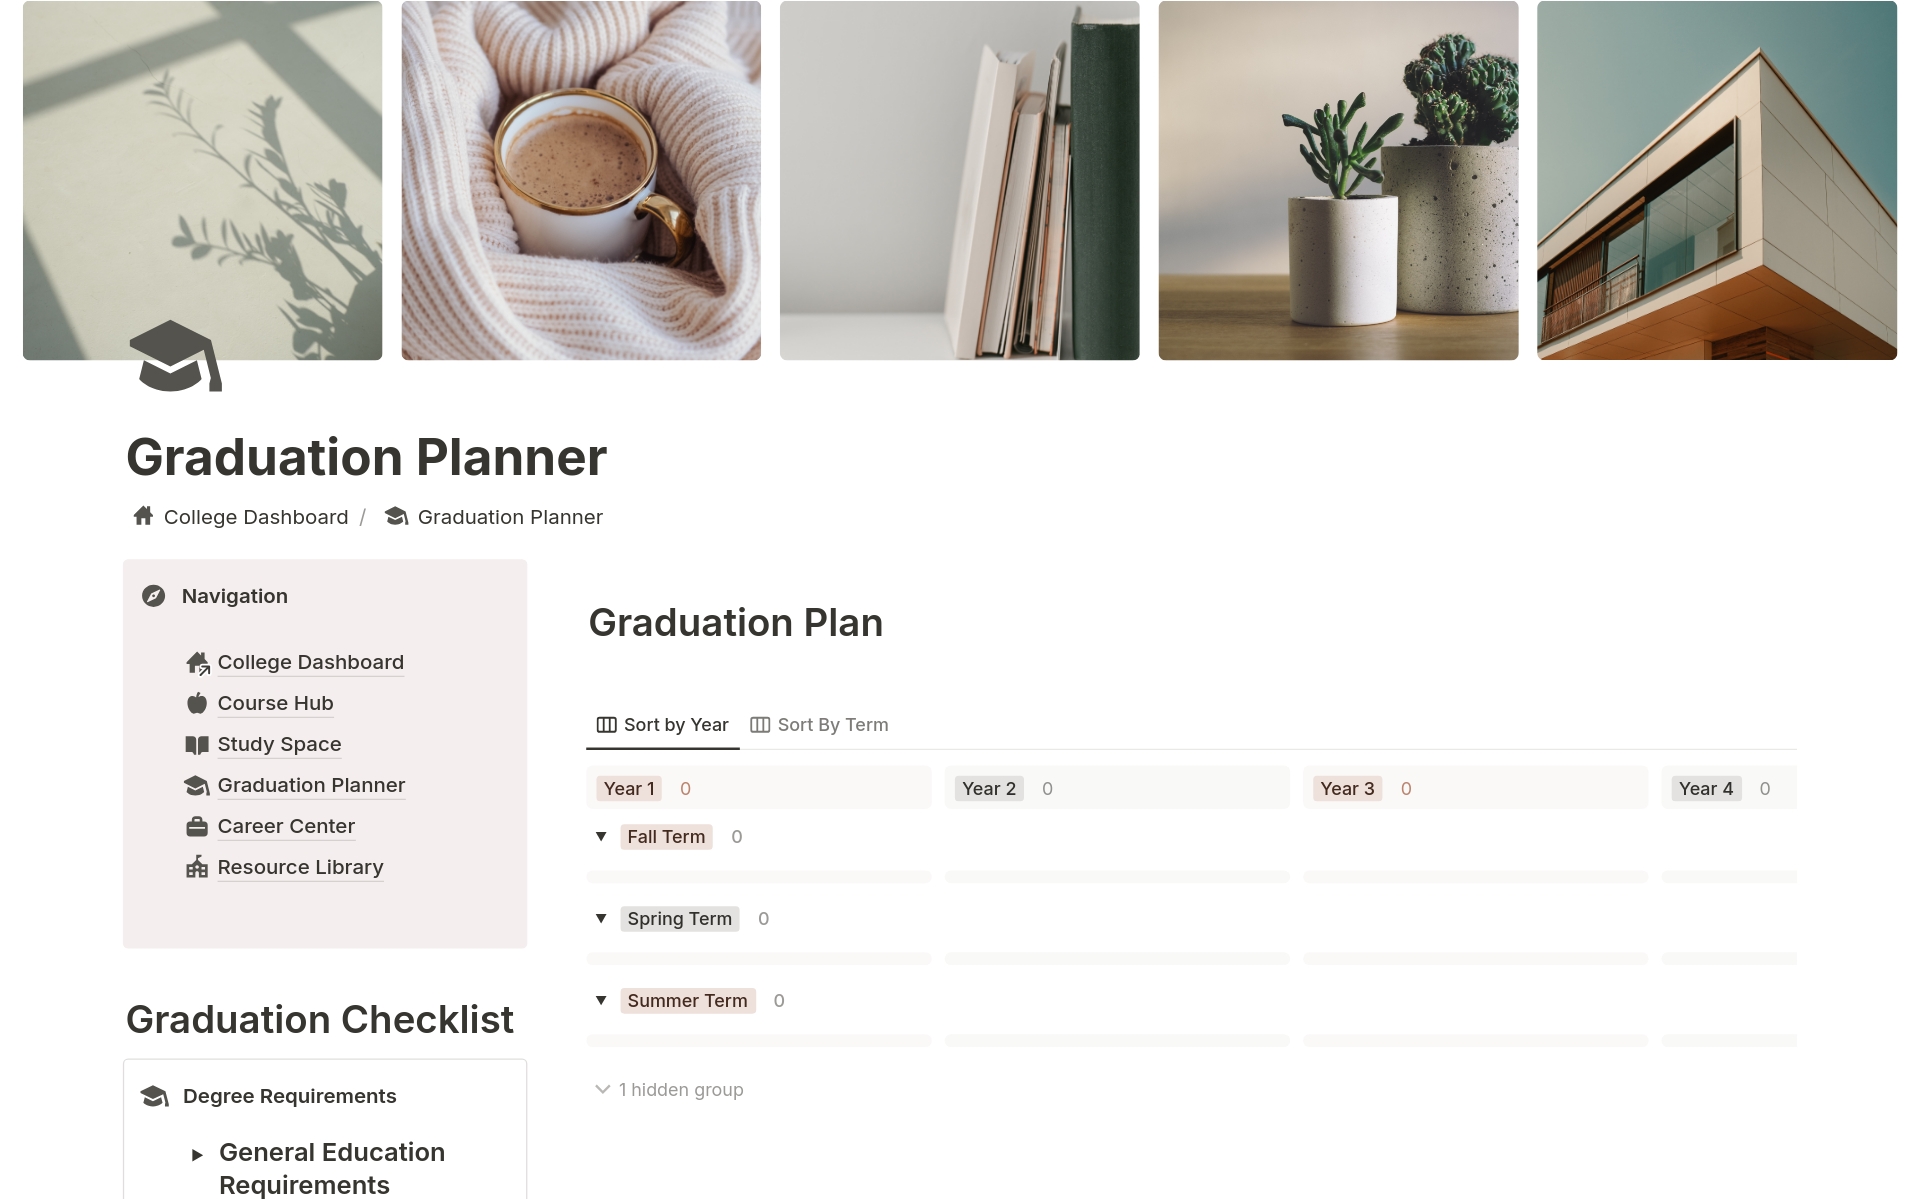 All-in-one student planner and academic dashboard is ADHD-friendly and easy to use for Notion beginners. It offers rare features like assignment tracker, reading list, graduation planner, career resources, and +140 tips and resources from an academic advisor and counselor!